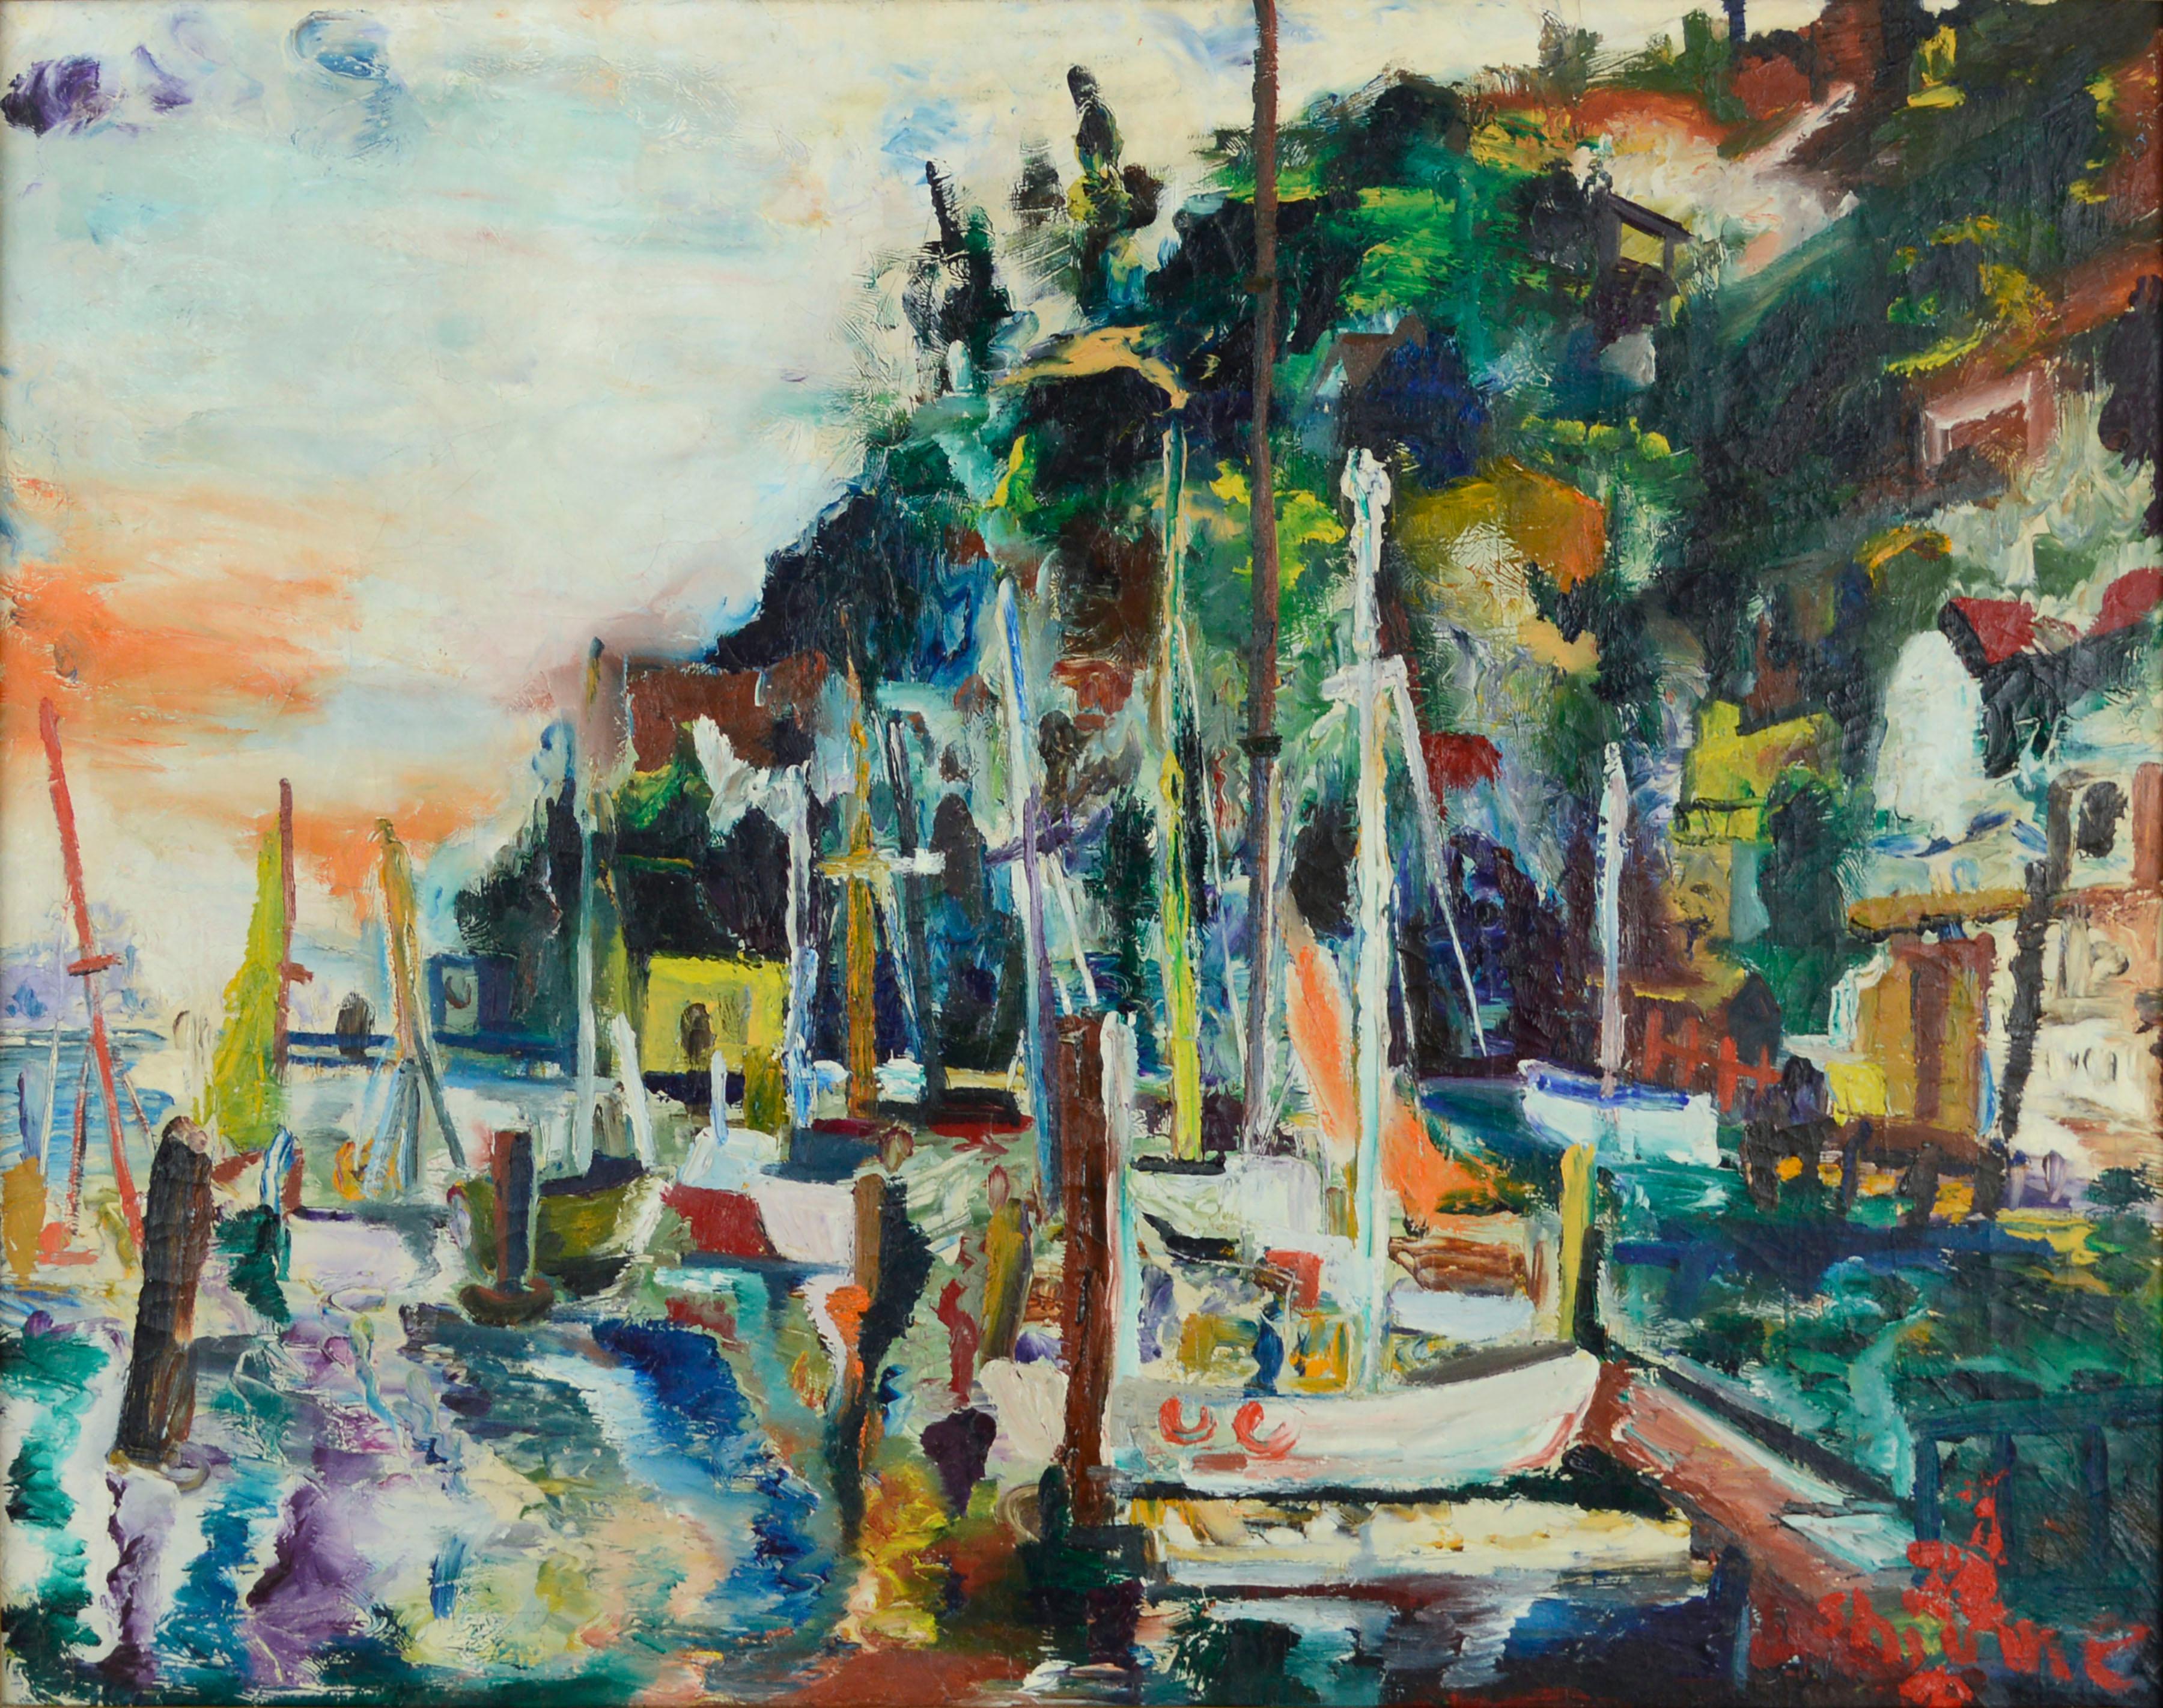 Sausalito Harbor Sailboats, MidCentury Abstract Expressionist Bay Area Seascape  - Painting by Shiume